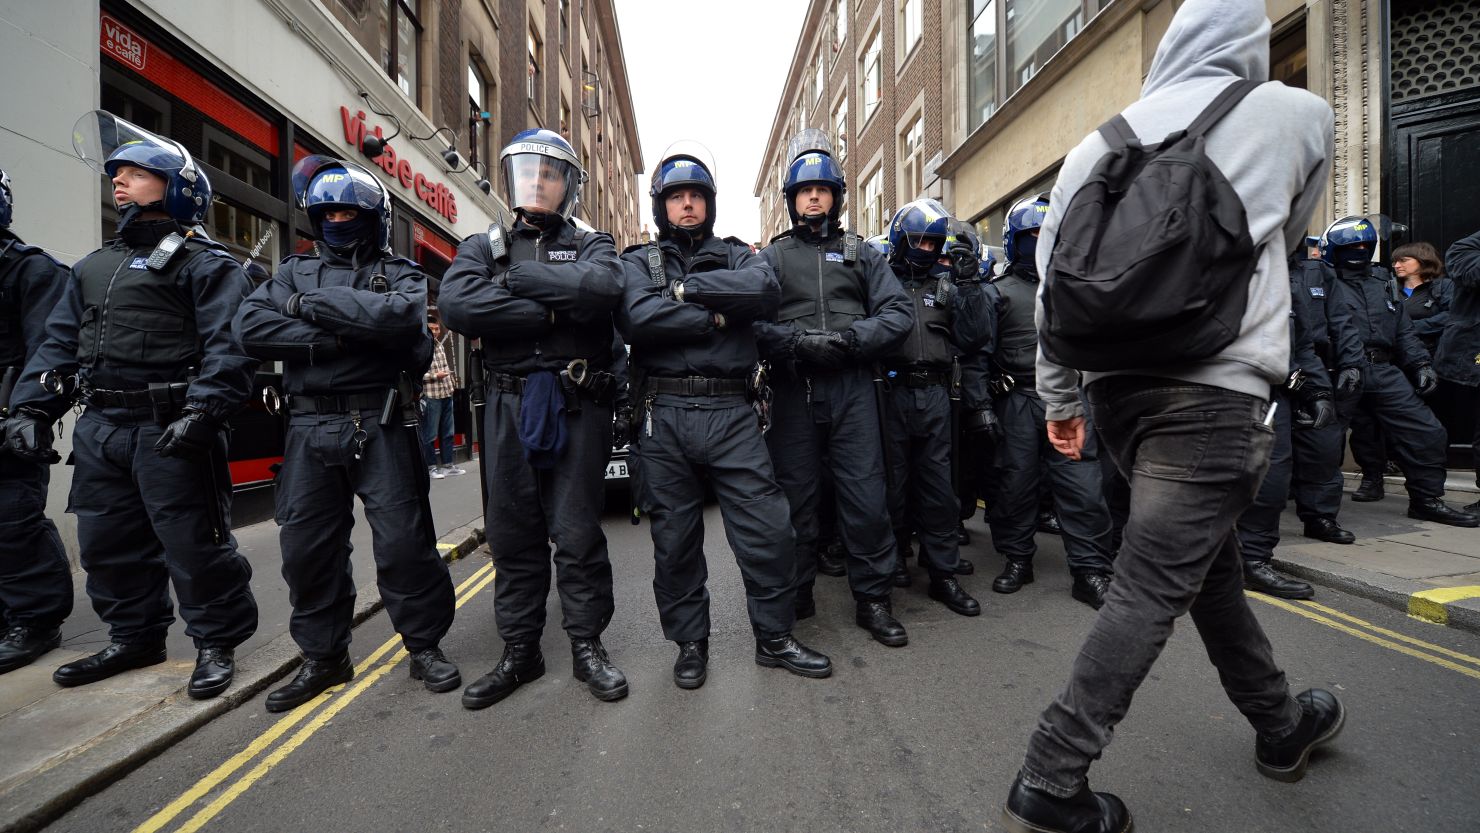 Security is high in London ahead of the G8 summit in Northern Ireland. Riot police stand guard as protests start.
